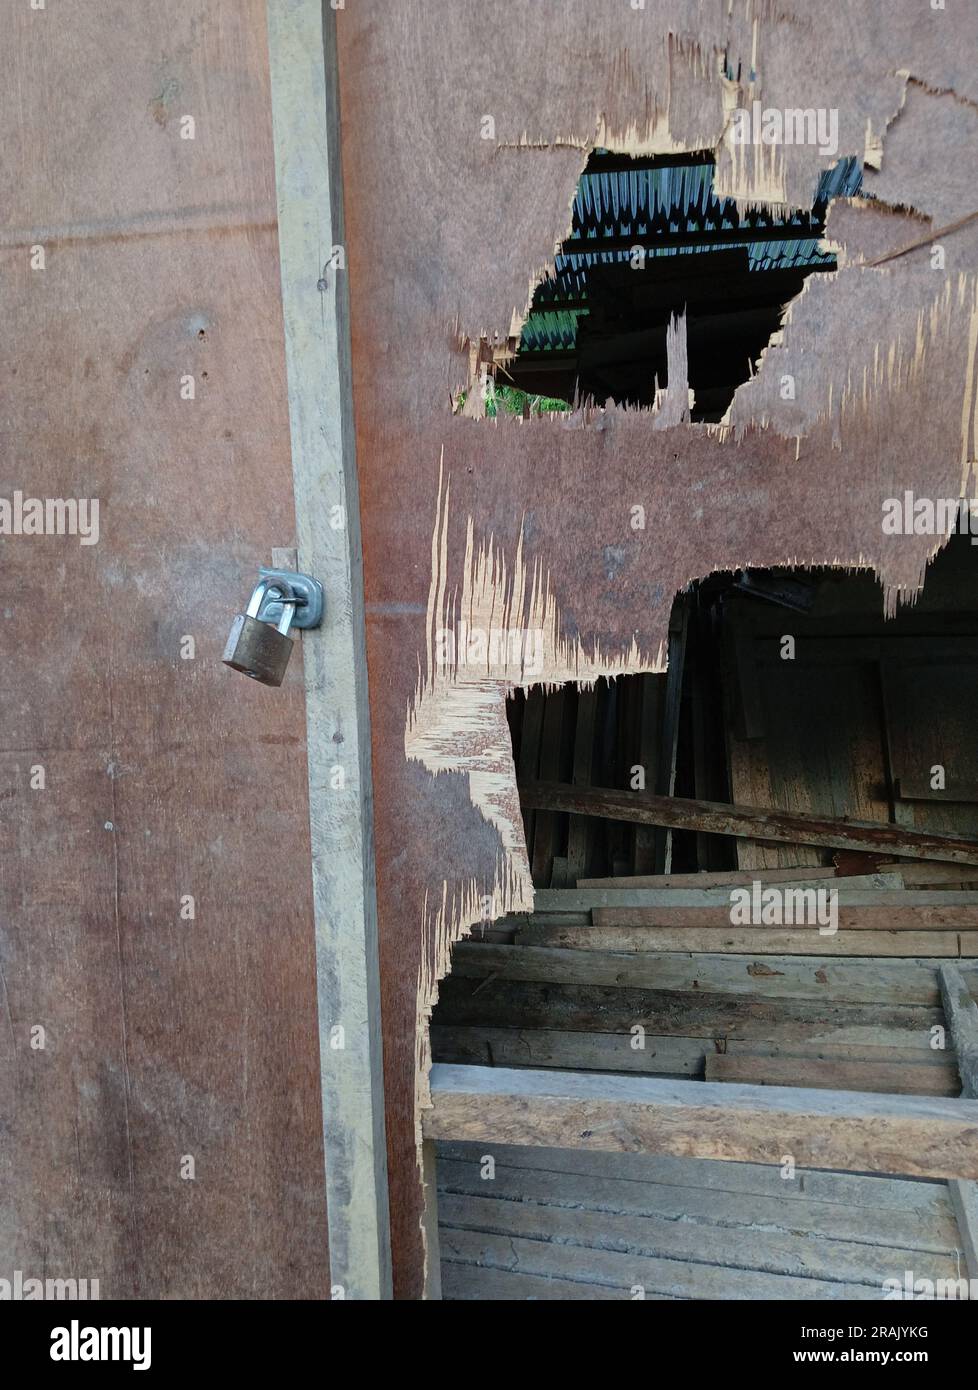 A small padlock attached to a door and wall made of plywood that has been damaged and has holes and shows the contents in the room. Stock Photo